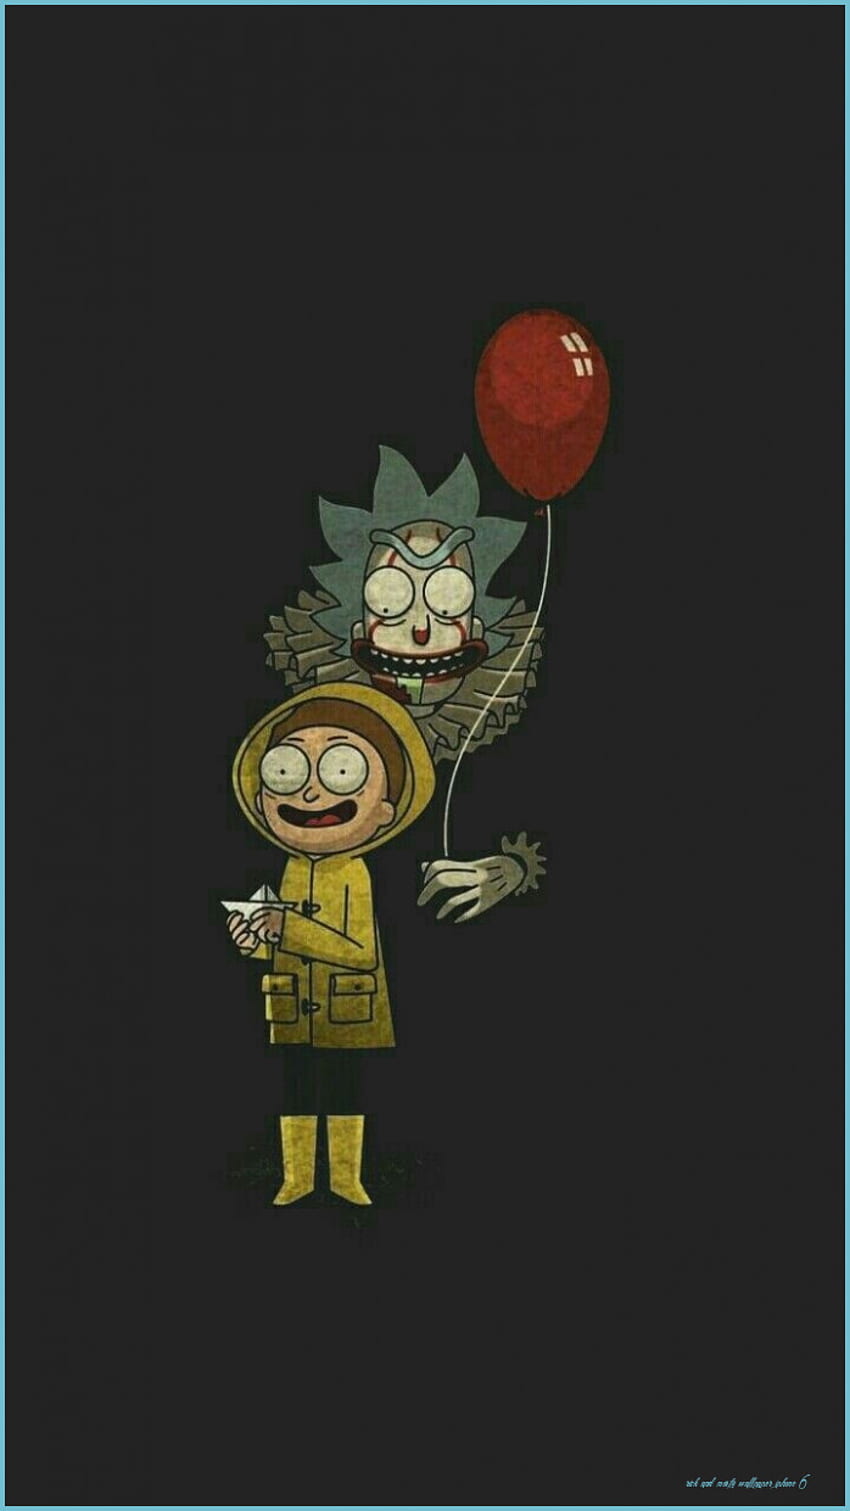 Rick And Morty iPhone Wallpapers  Wallpaper Cave